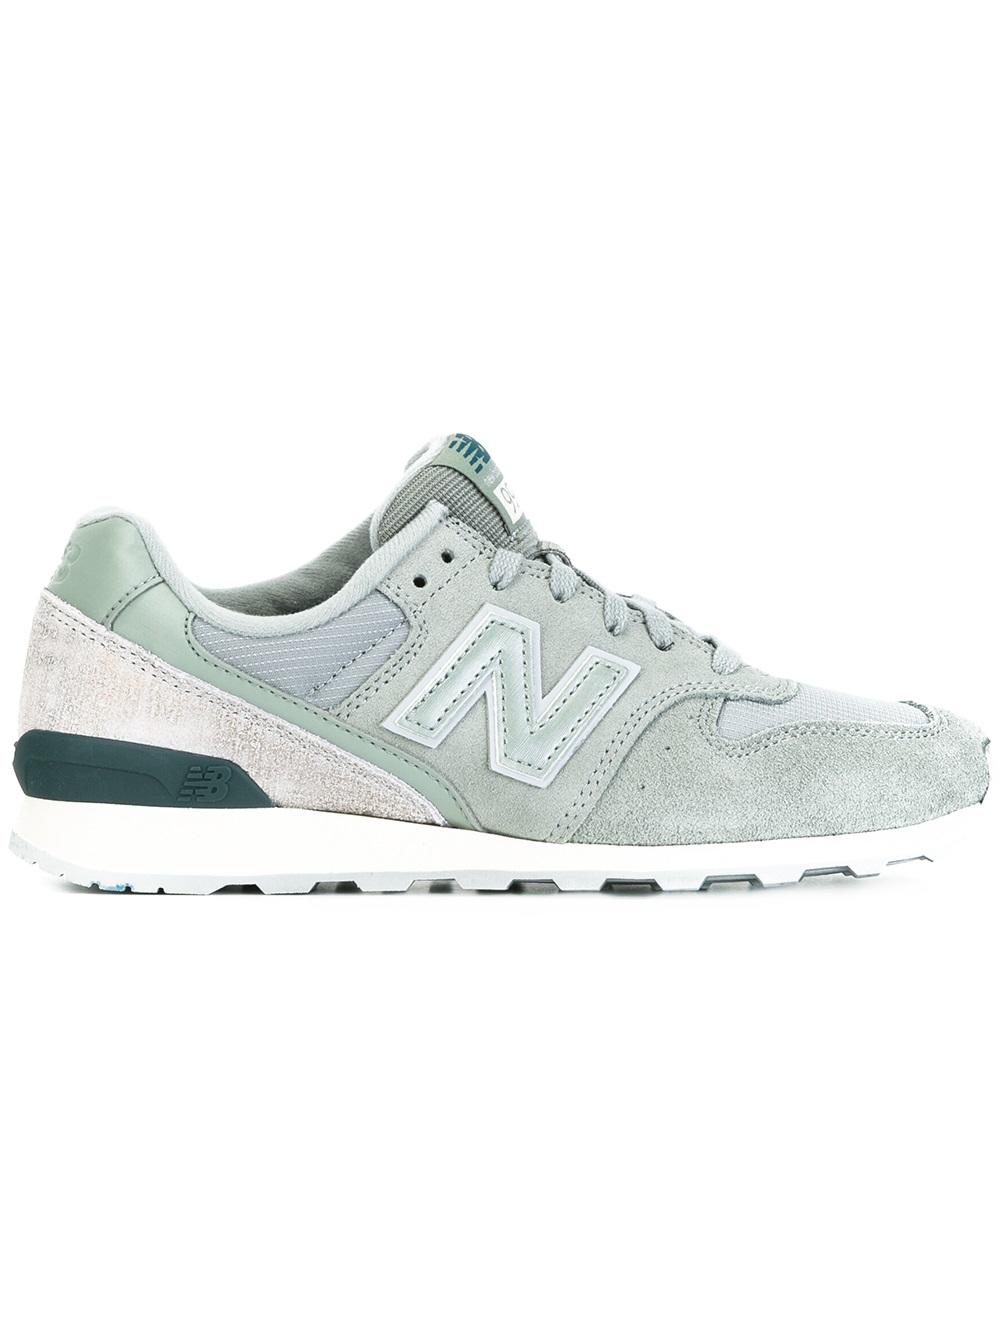 sneakers new balance soldes, ... New Balance 'Model 996' sneakers Femme Chaussures,prix new balance,comparez les ...